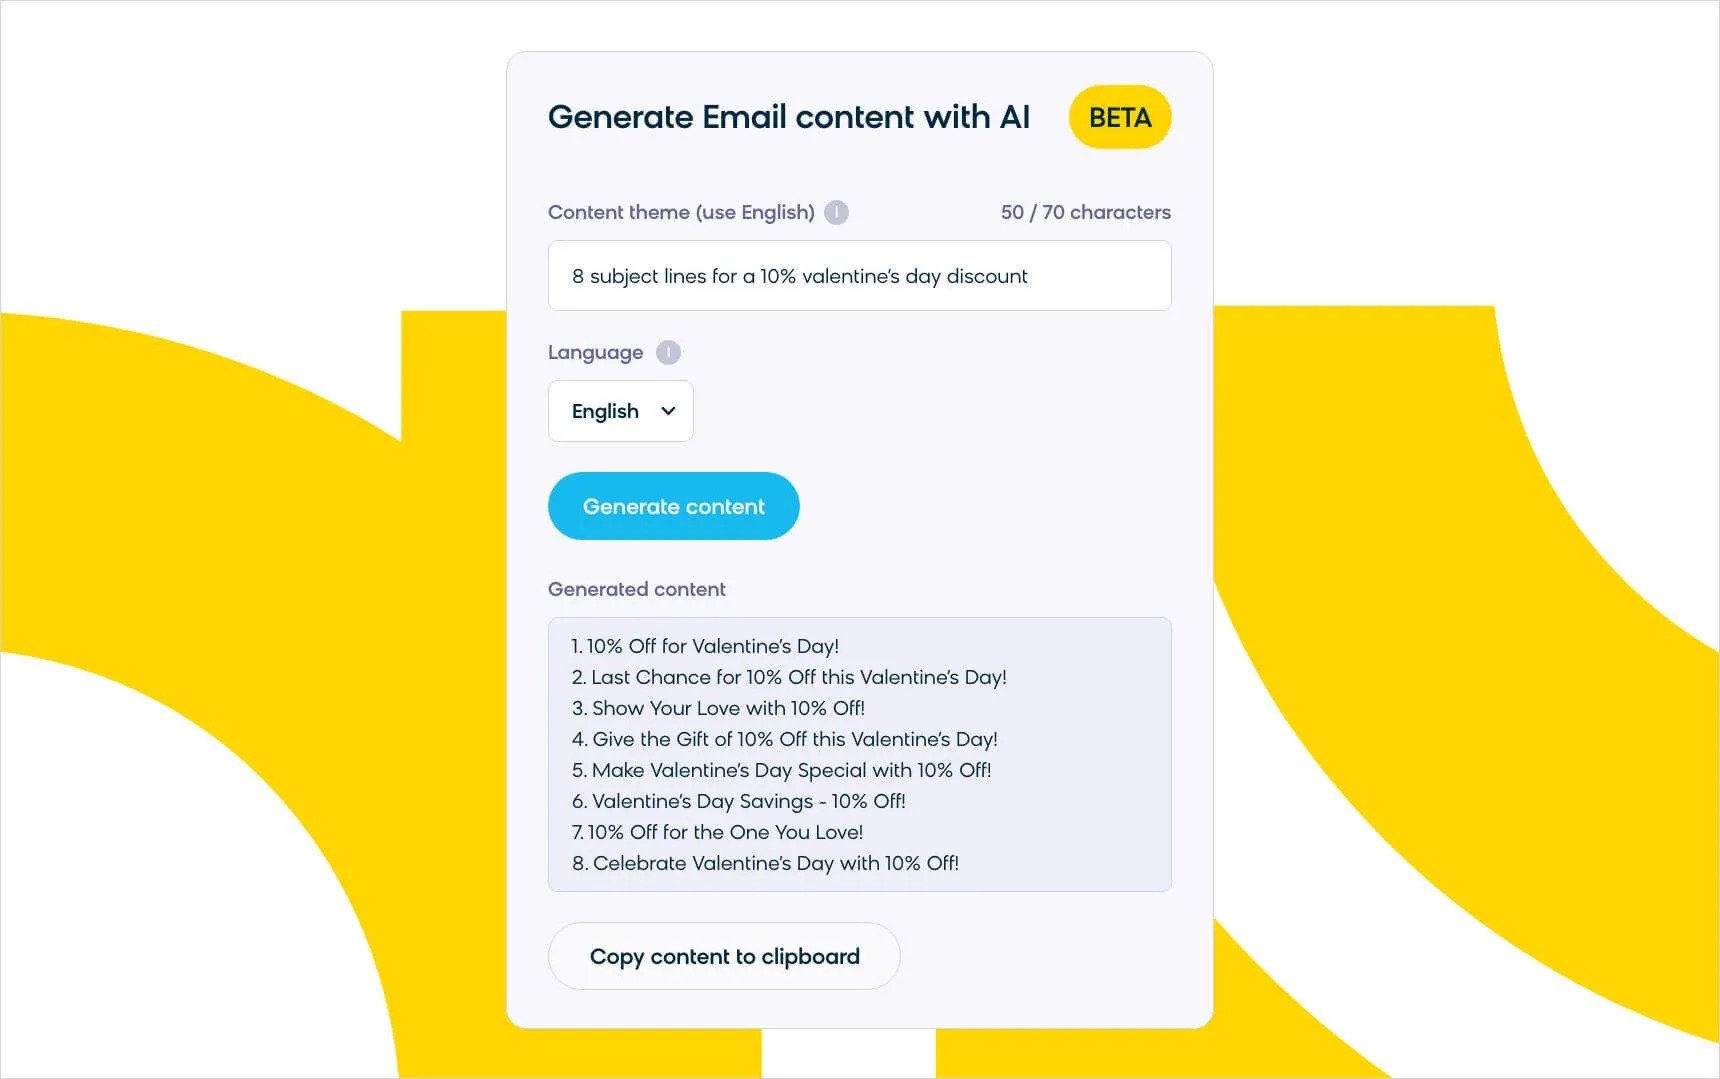 Email content creation using generative AI